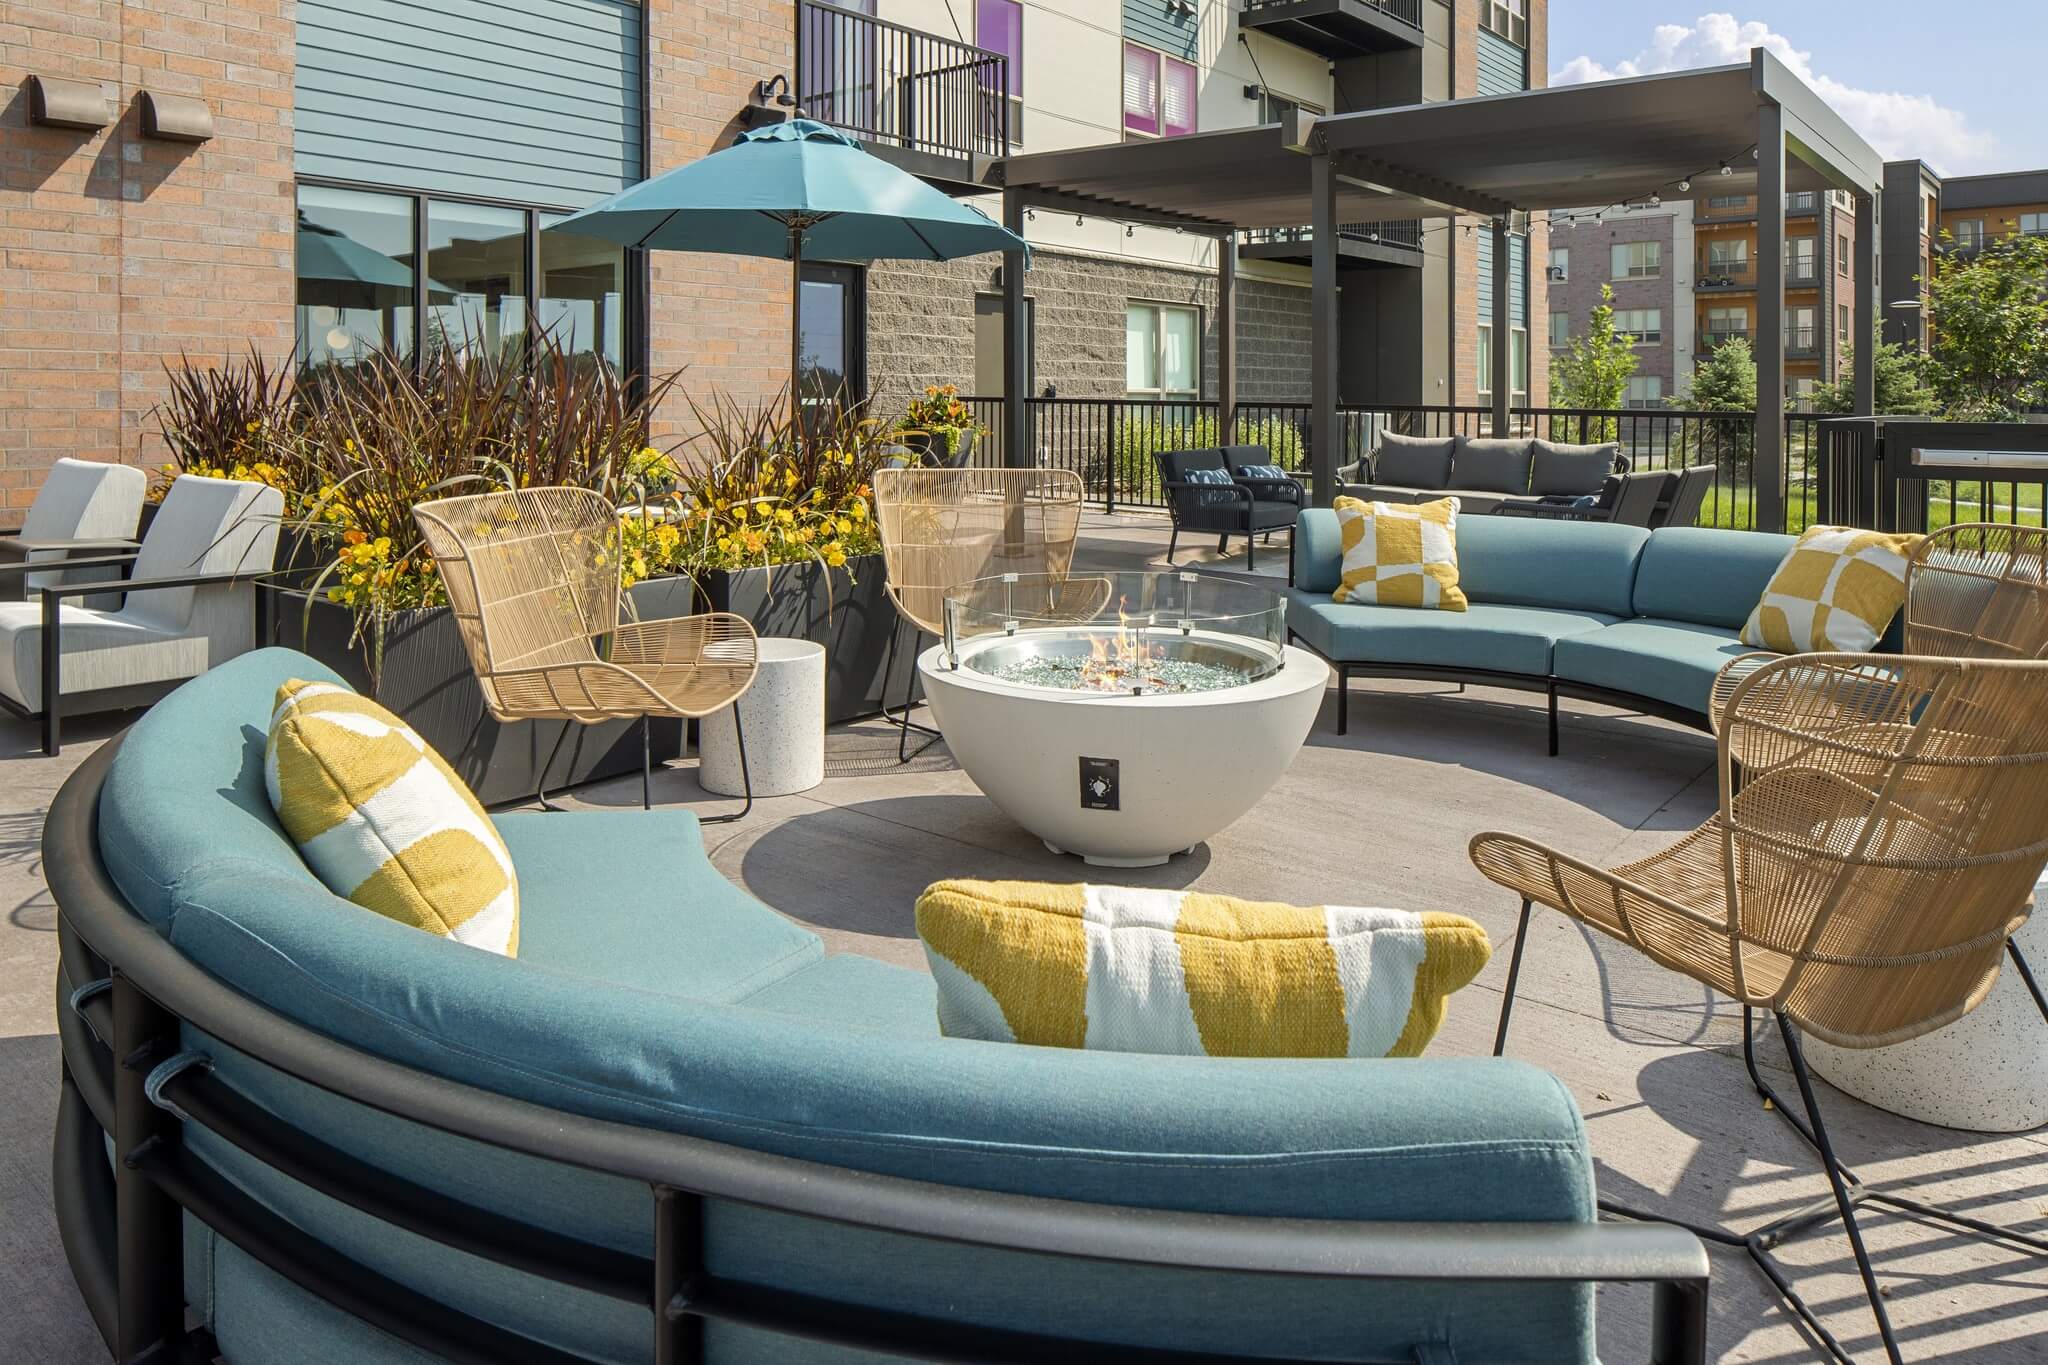 Aster at Riverdale Station outdoor amenity terrace with couches and umbrellas